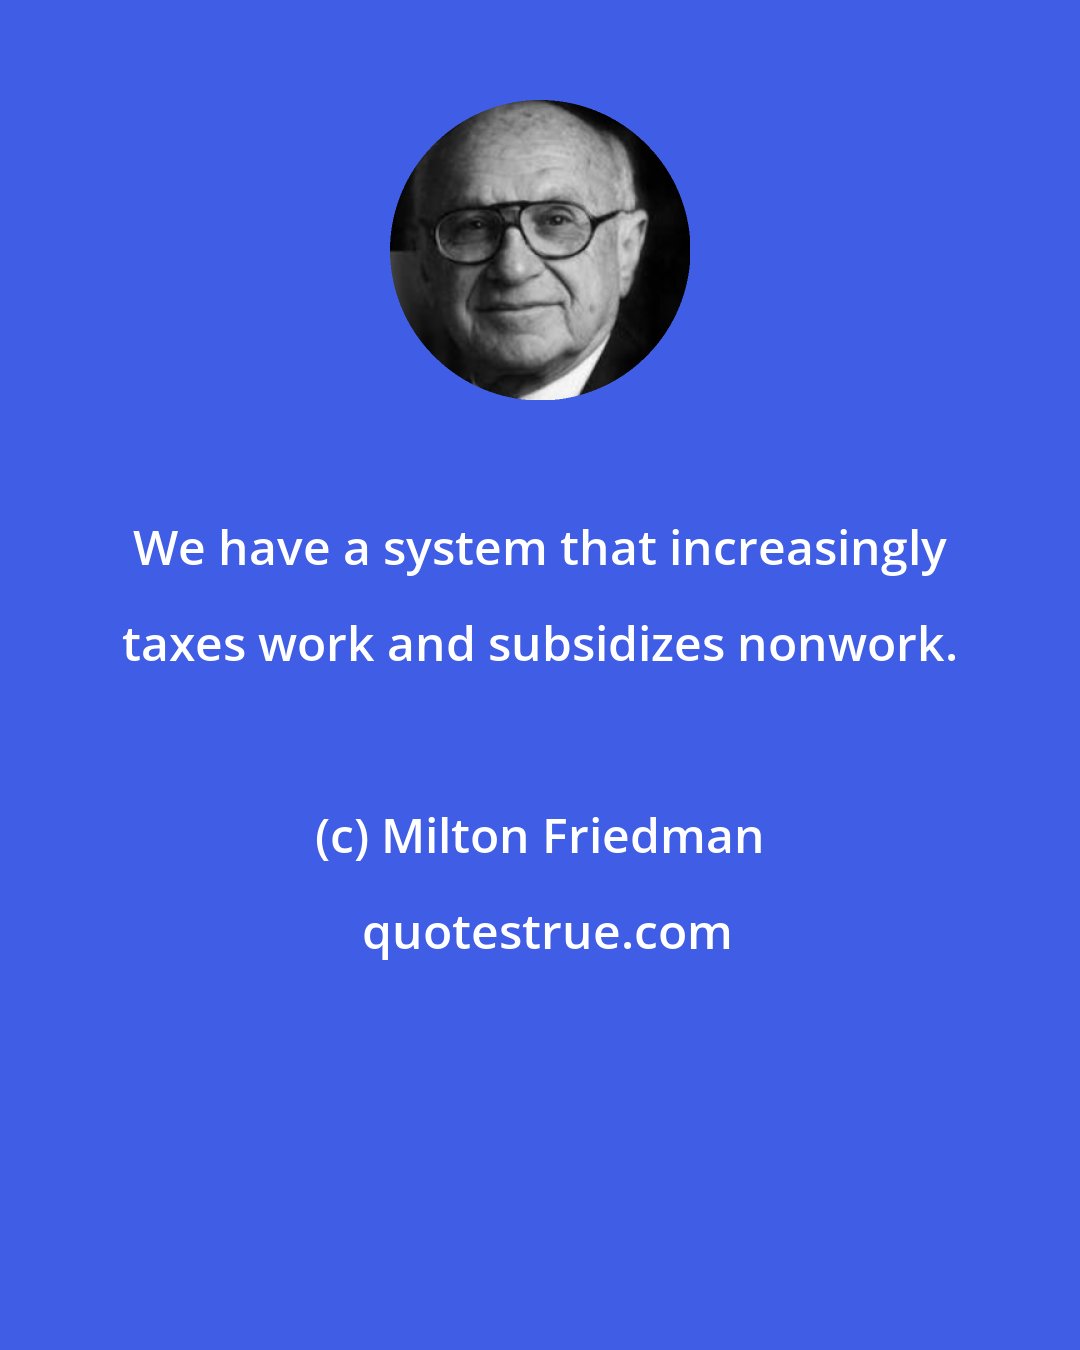 Milton Friedman: We have a system that increasingly taxes work and subsidizes nonwork.